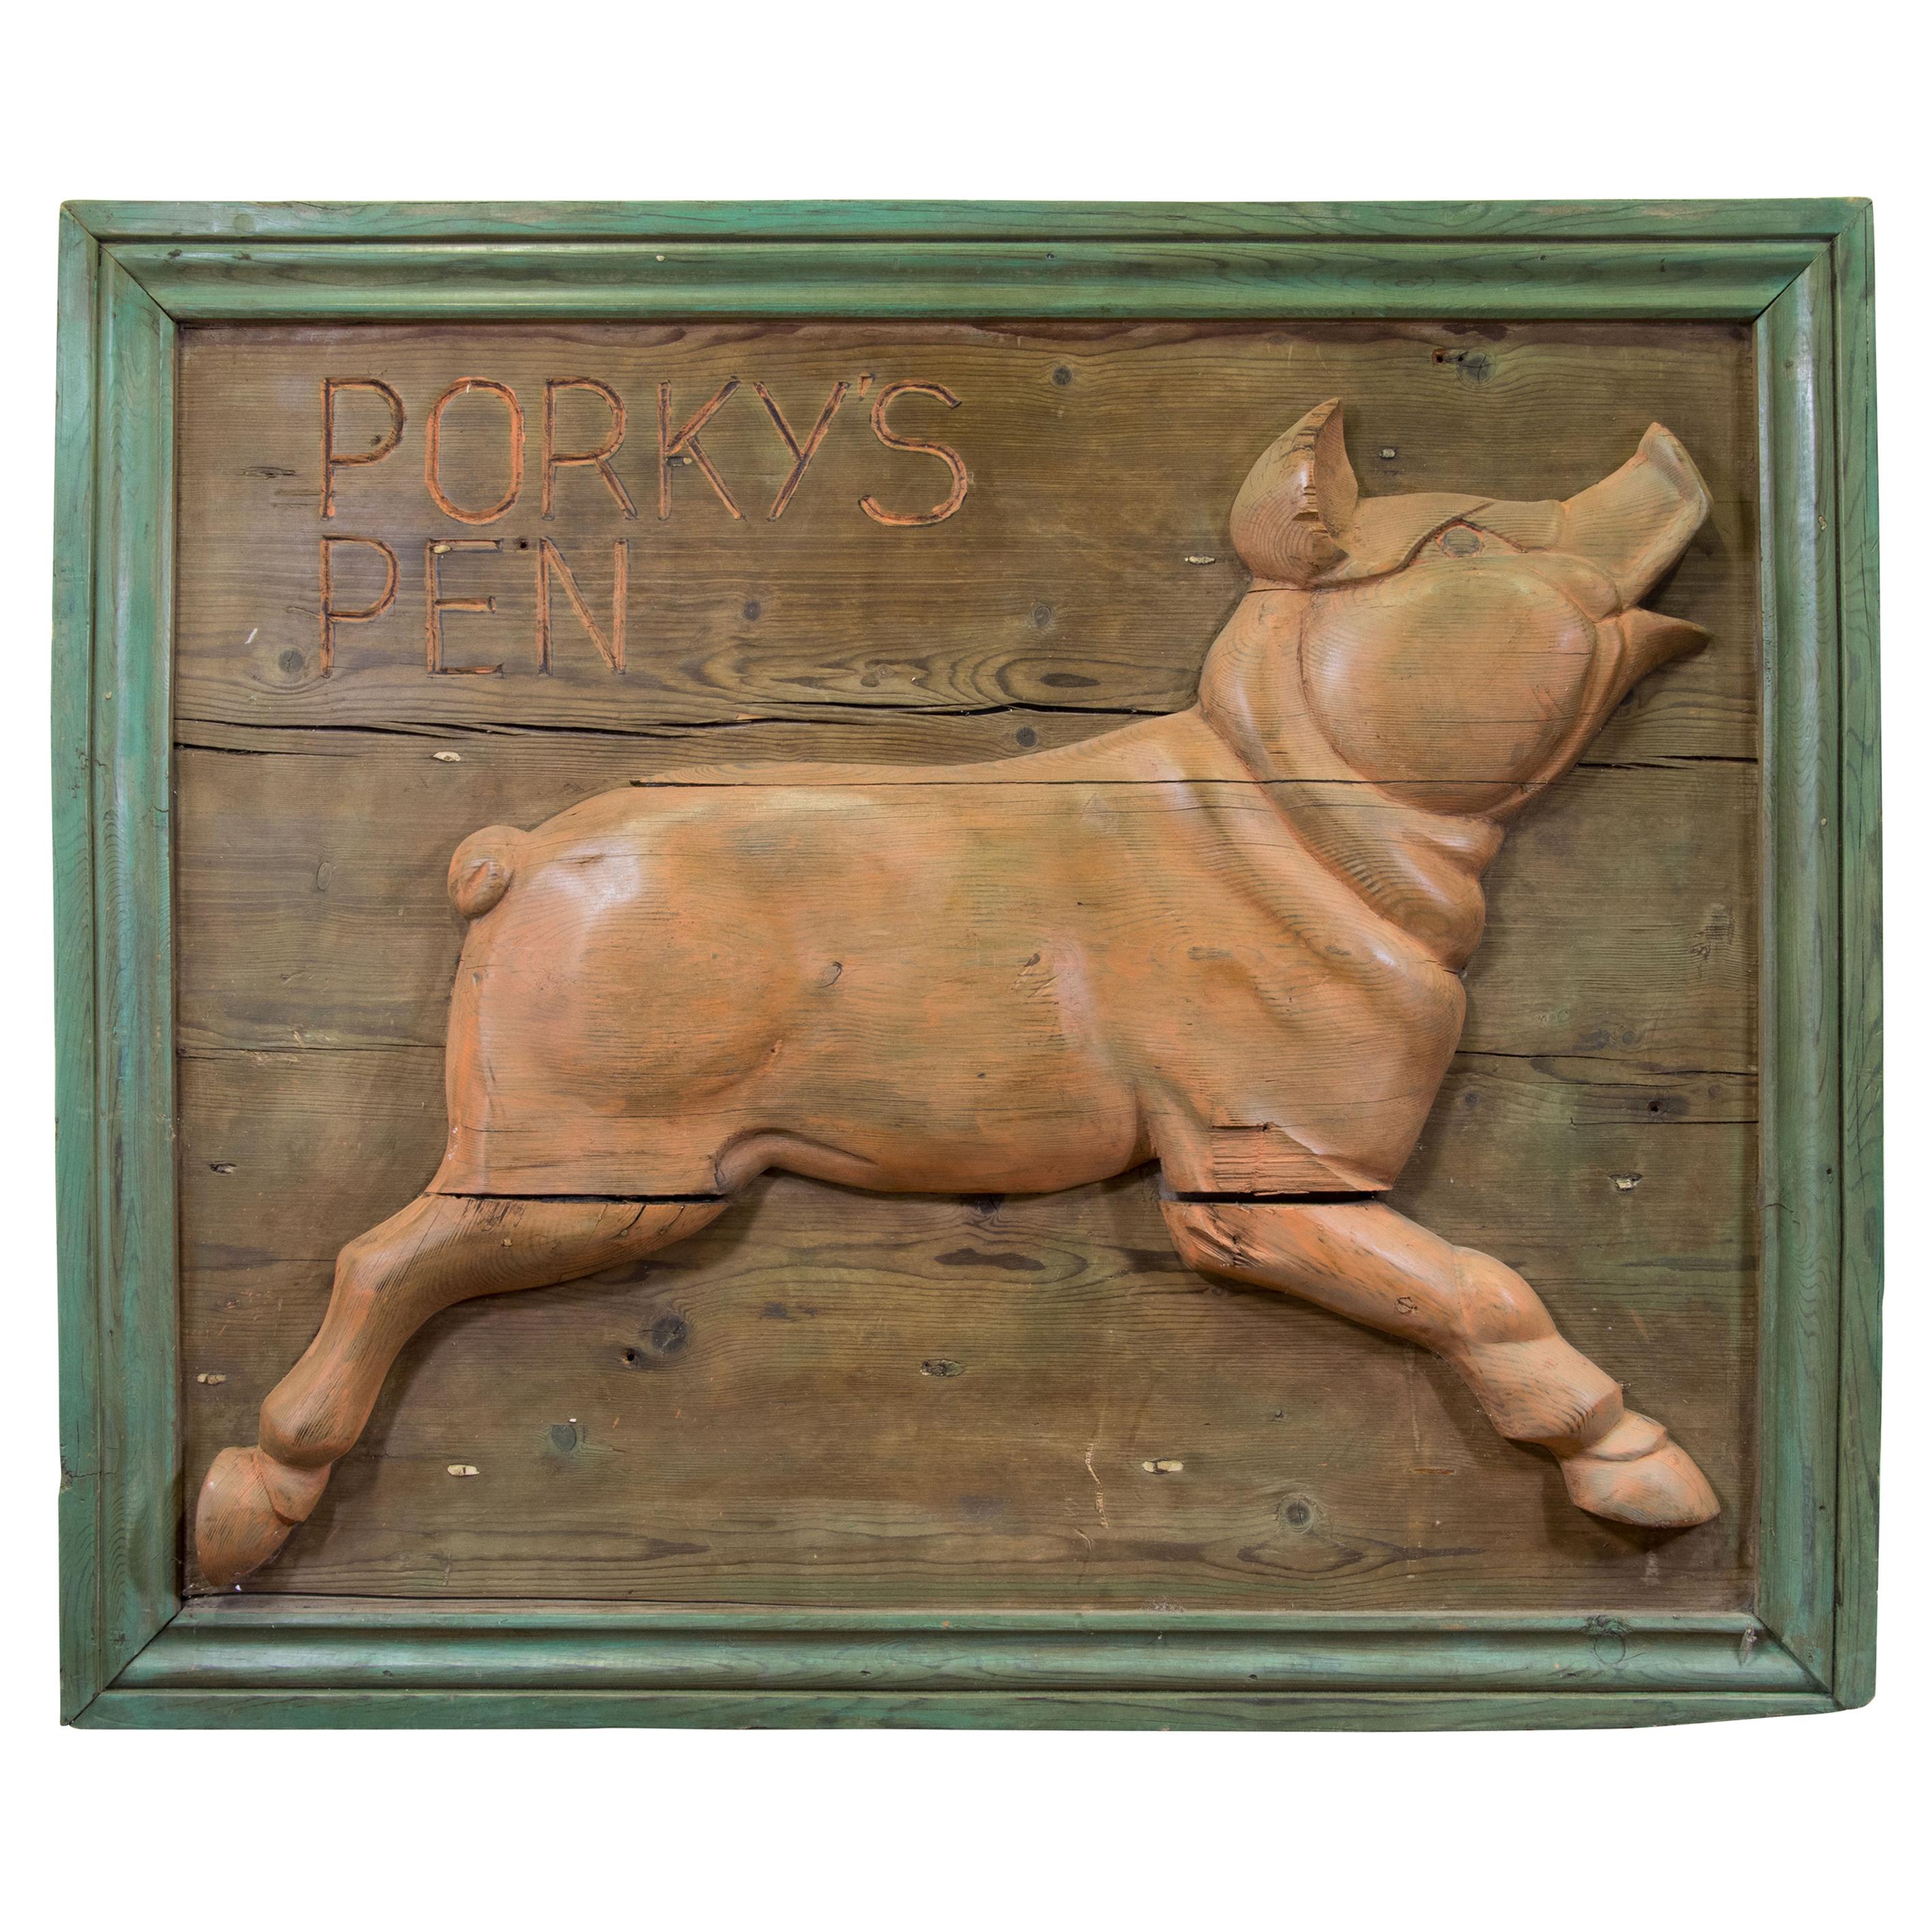 1900s Butcher's Pig Trade Sign